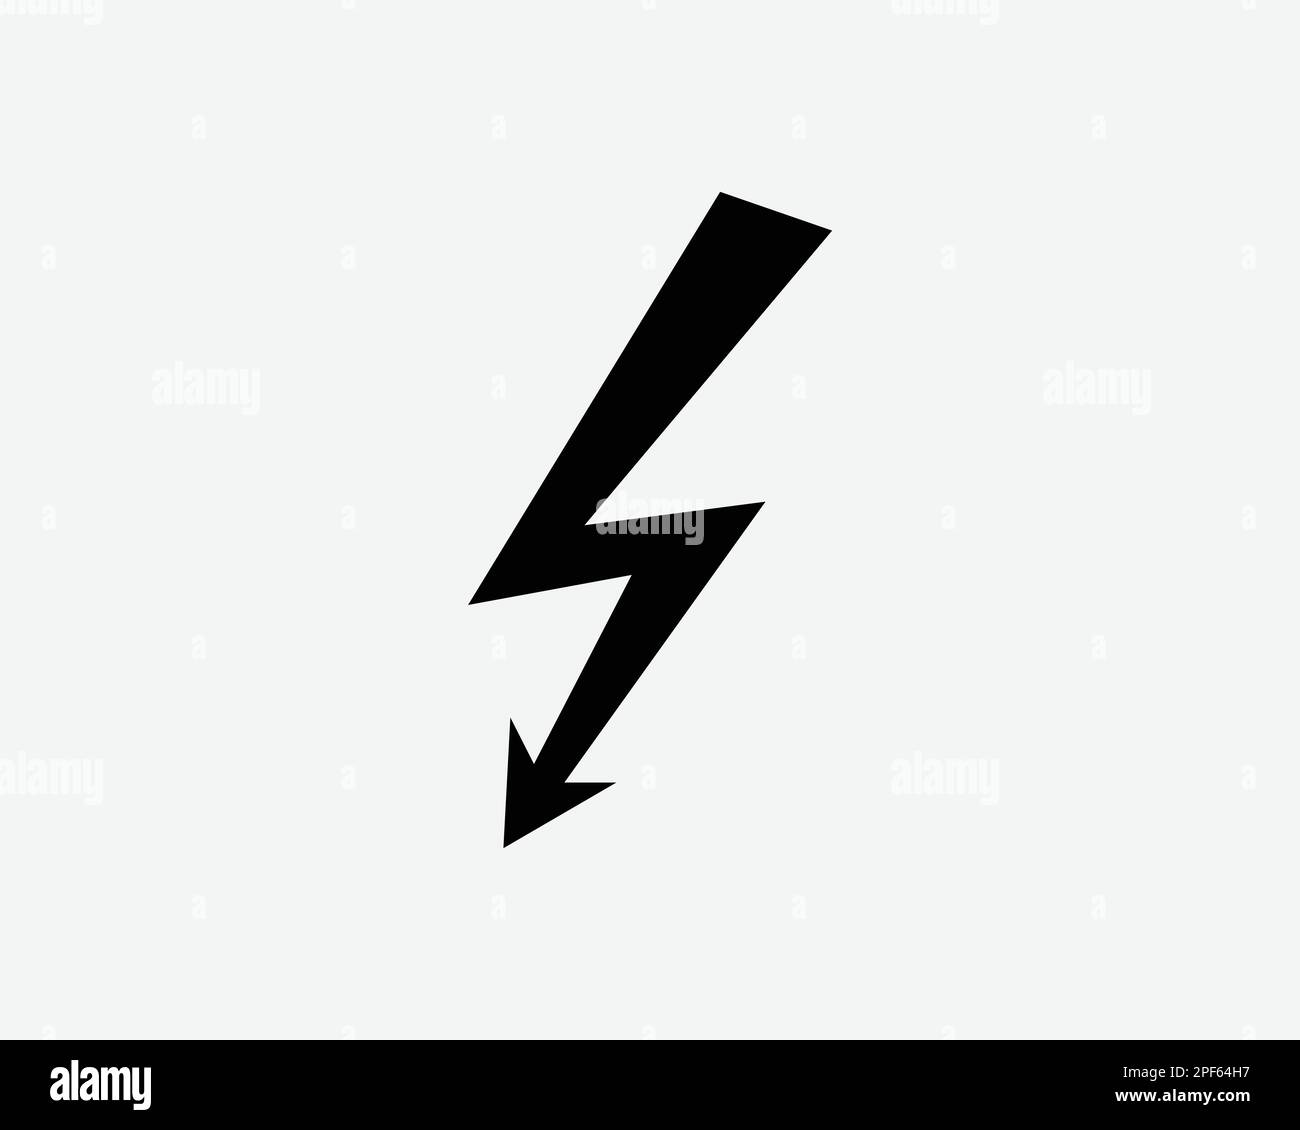 Electricity Electrical Electric Thunder Lighting Bolt Black White Silhouette Symbol Icon Sign Graphic Clipart Artwork Illustration Pictogram Vector Stock Vector